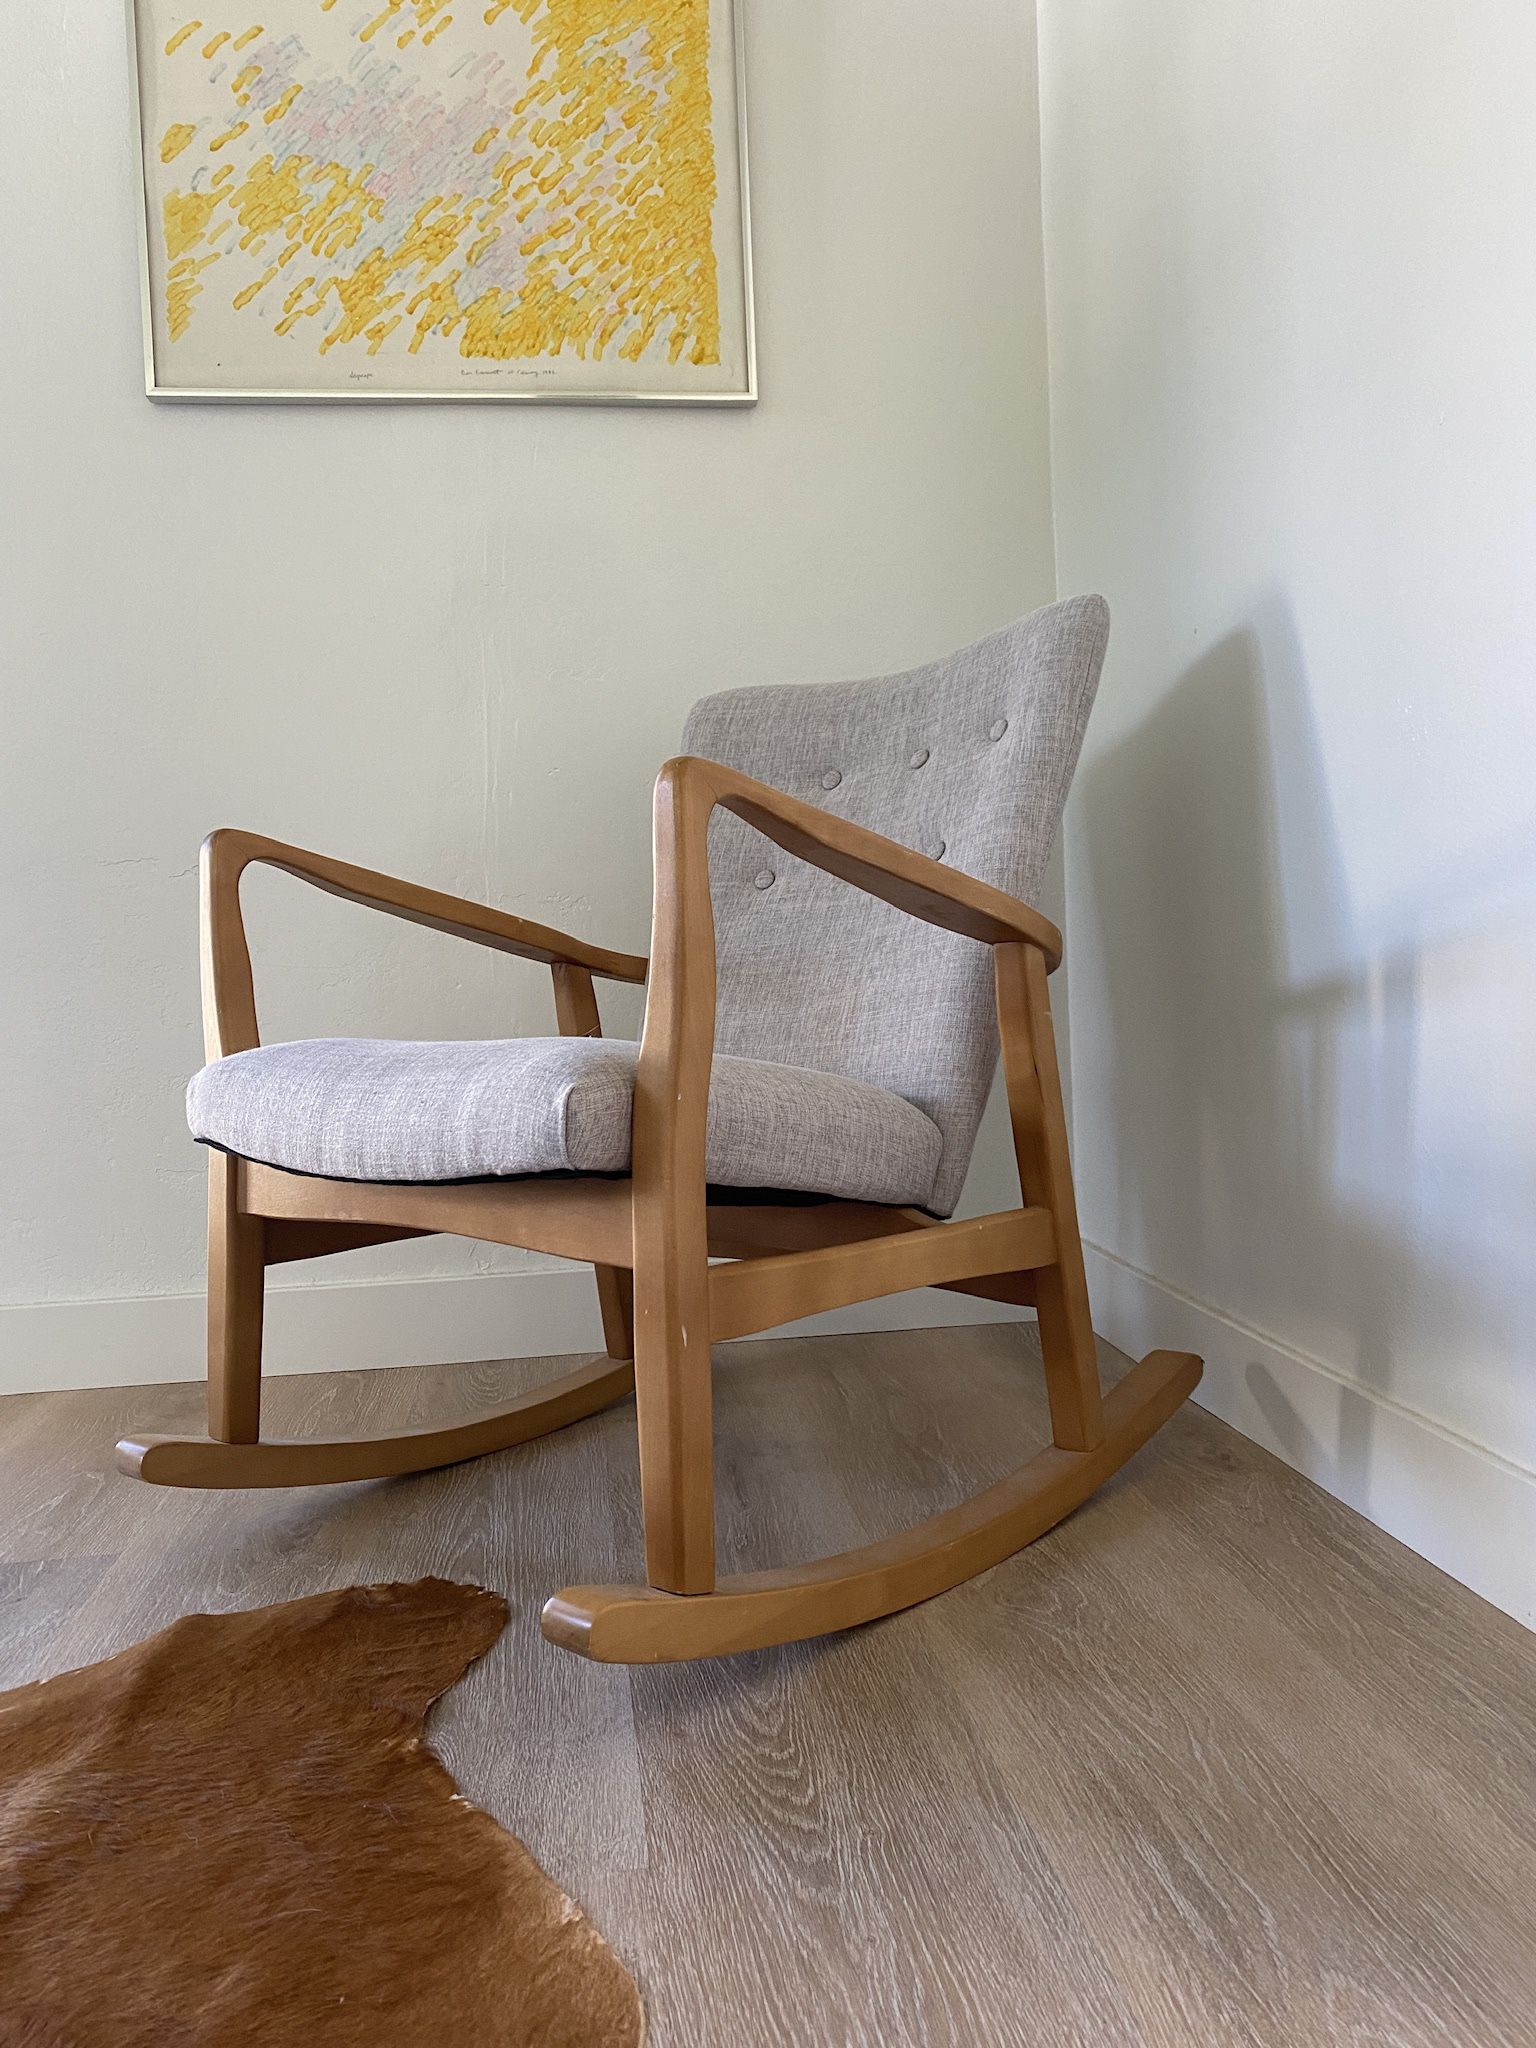 Cozy Upholstered Wood Rocking Chair